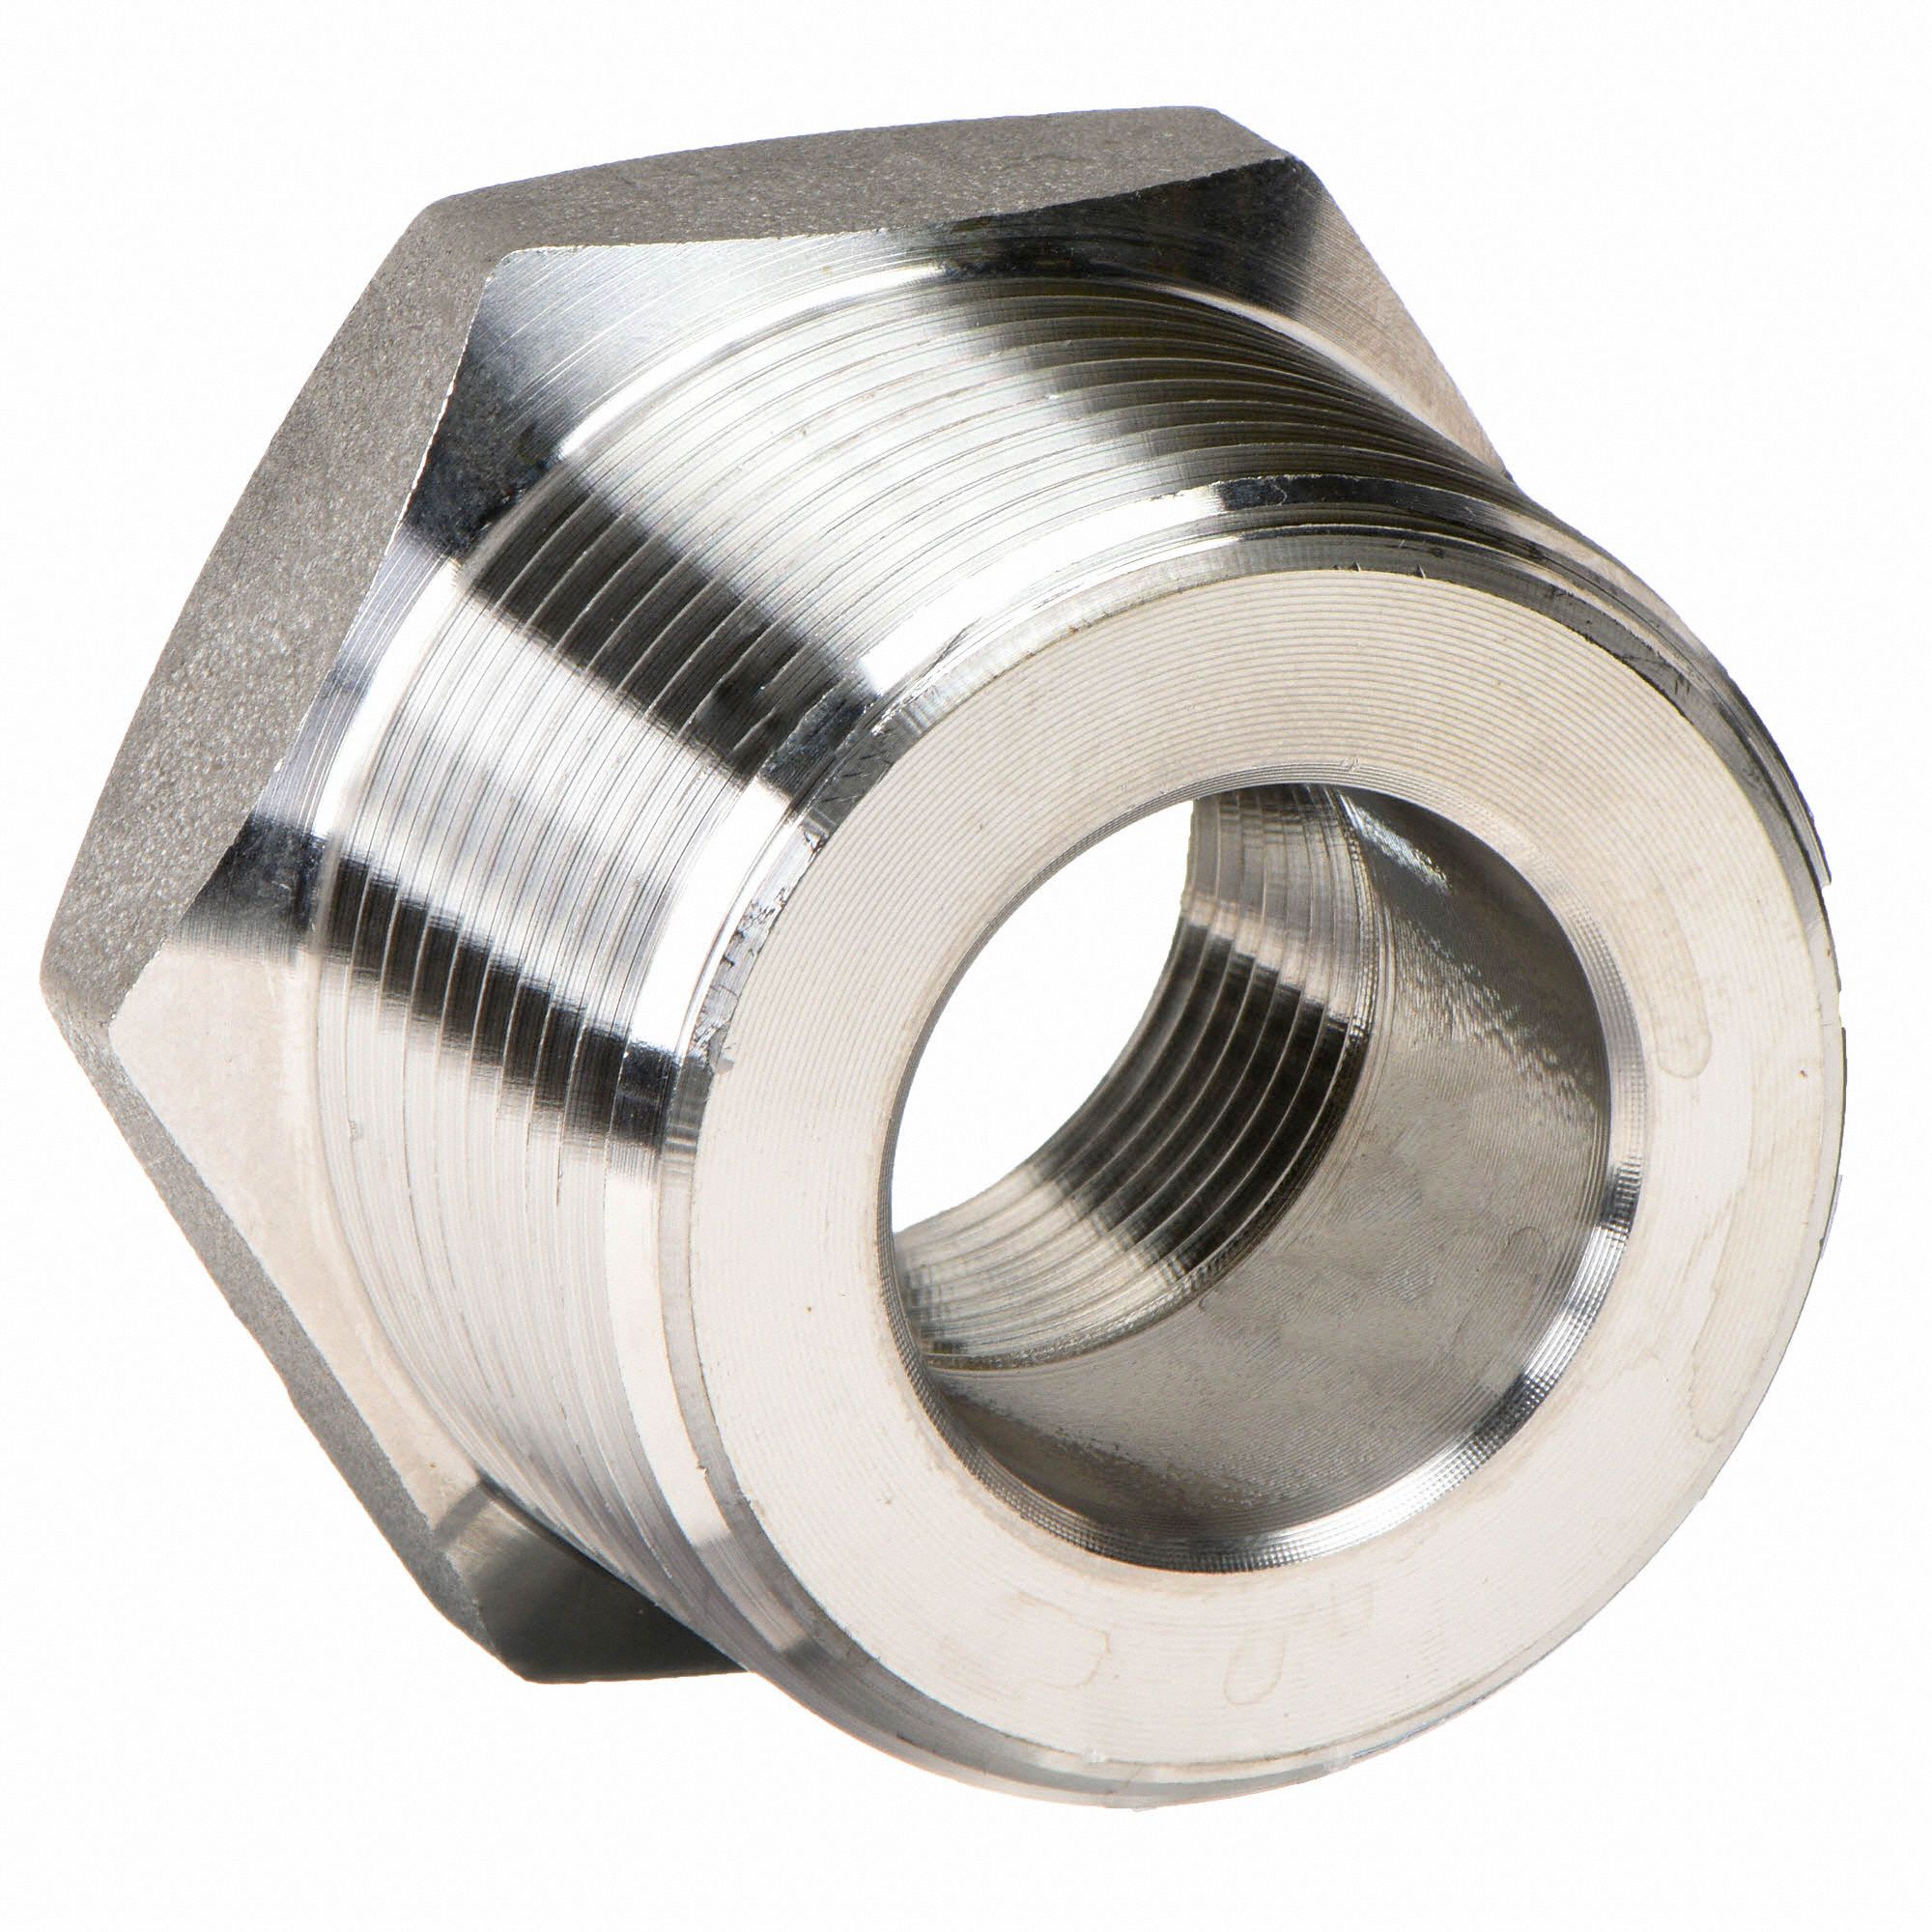 High Pressure 316 SS 1/2" MNPT x 1/4" FNPT Forged Stainless 3000# Hex Bushing